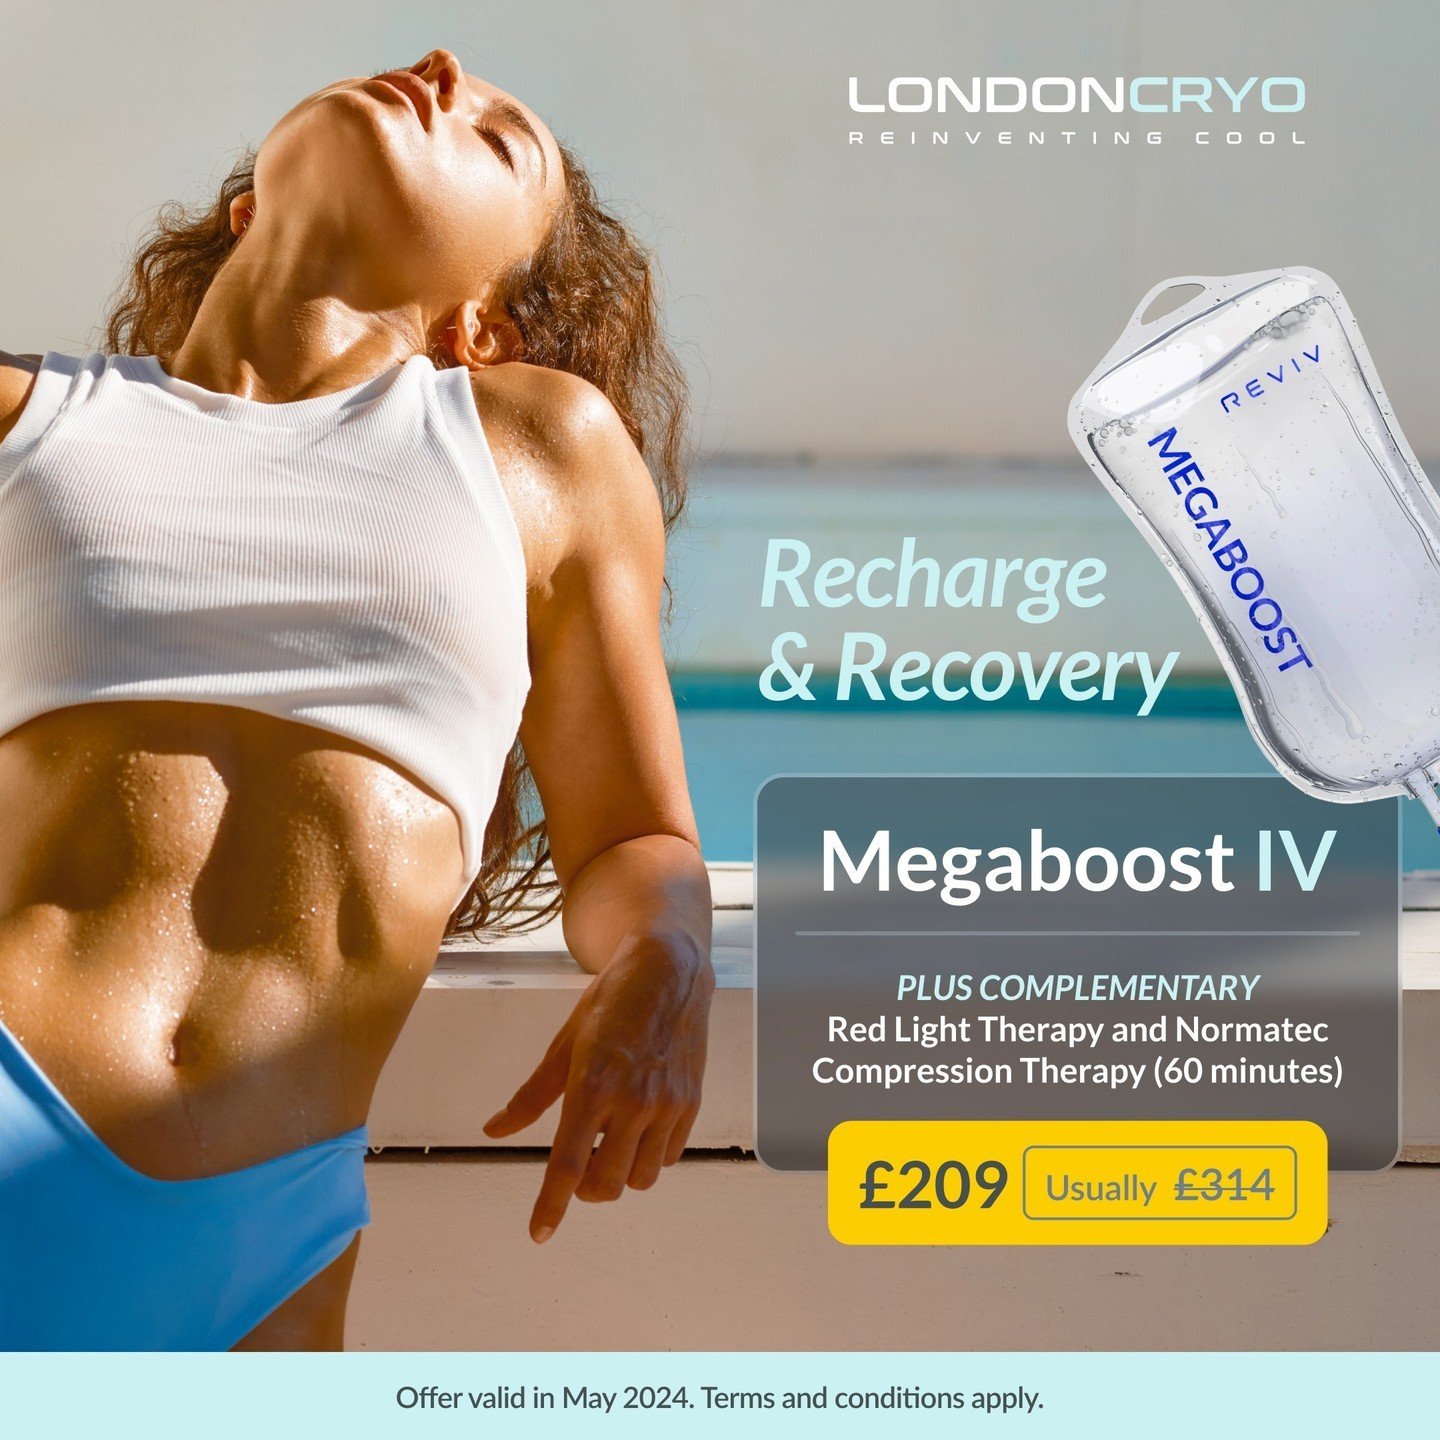 Revitalise your body with our Recharge &amp; Recovery package featuring MEGABOOST REVIV IV therapy! 💫 Boost energy, aid detox, hydrate, and support immunity for just &pound;209 (usually &pound;314). Plus, enjoy a 60-minute session of Red Light Thera